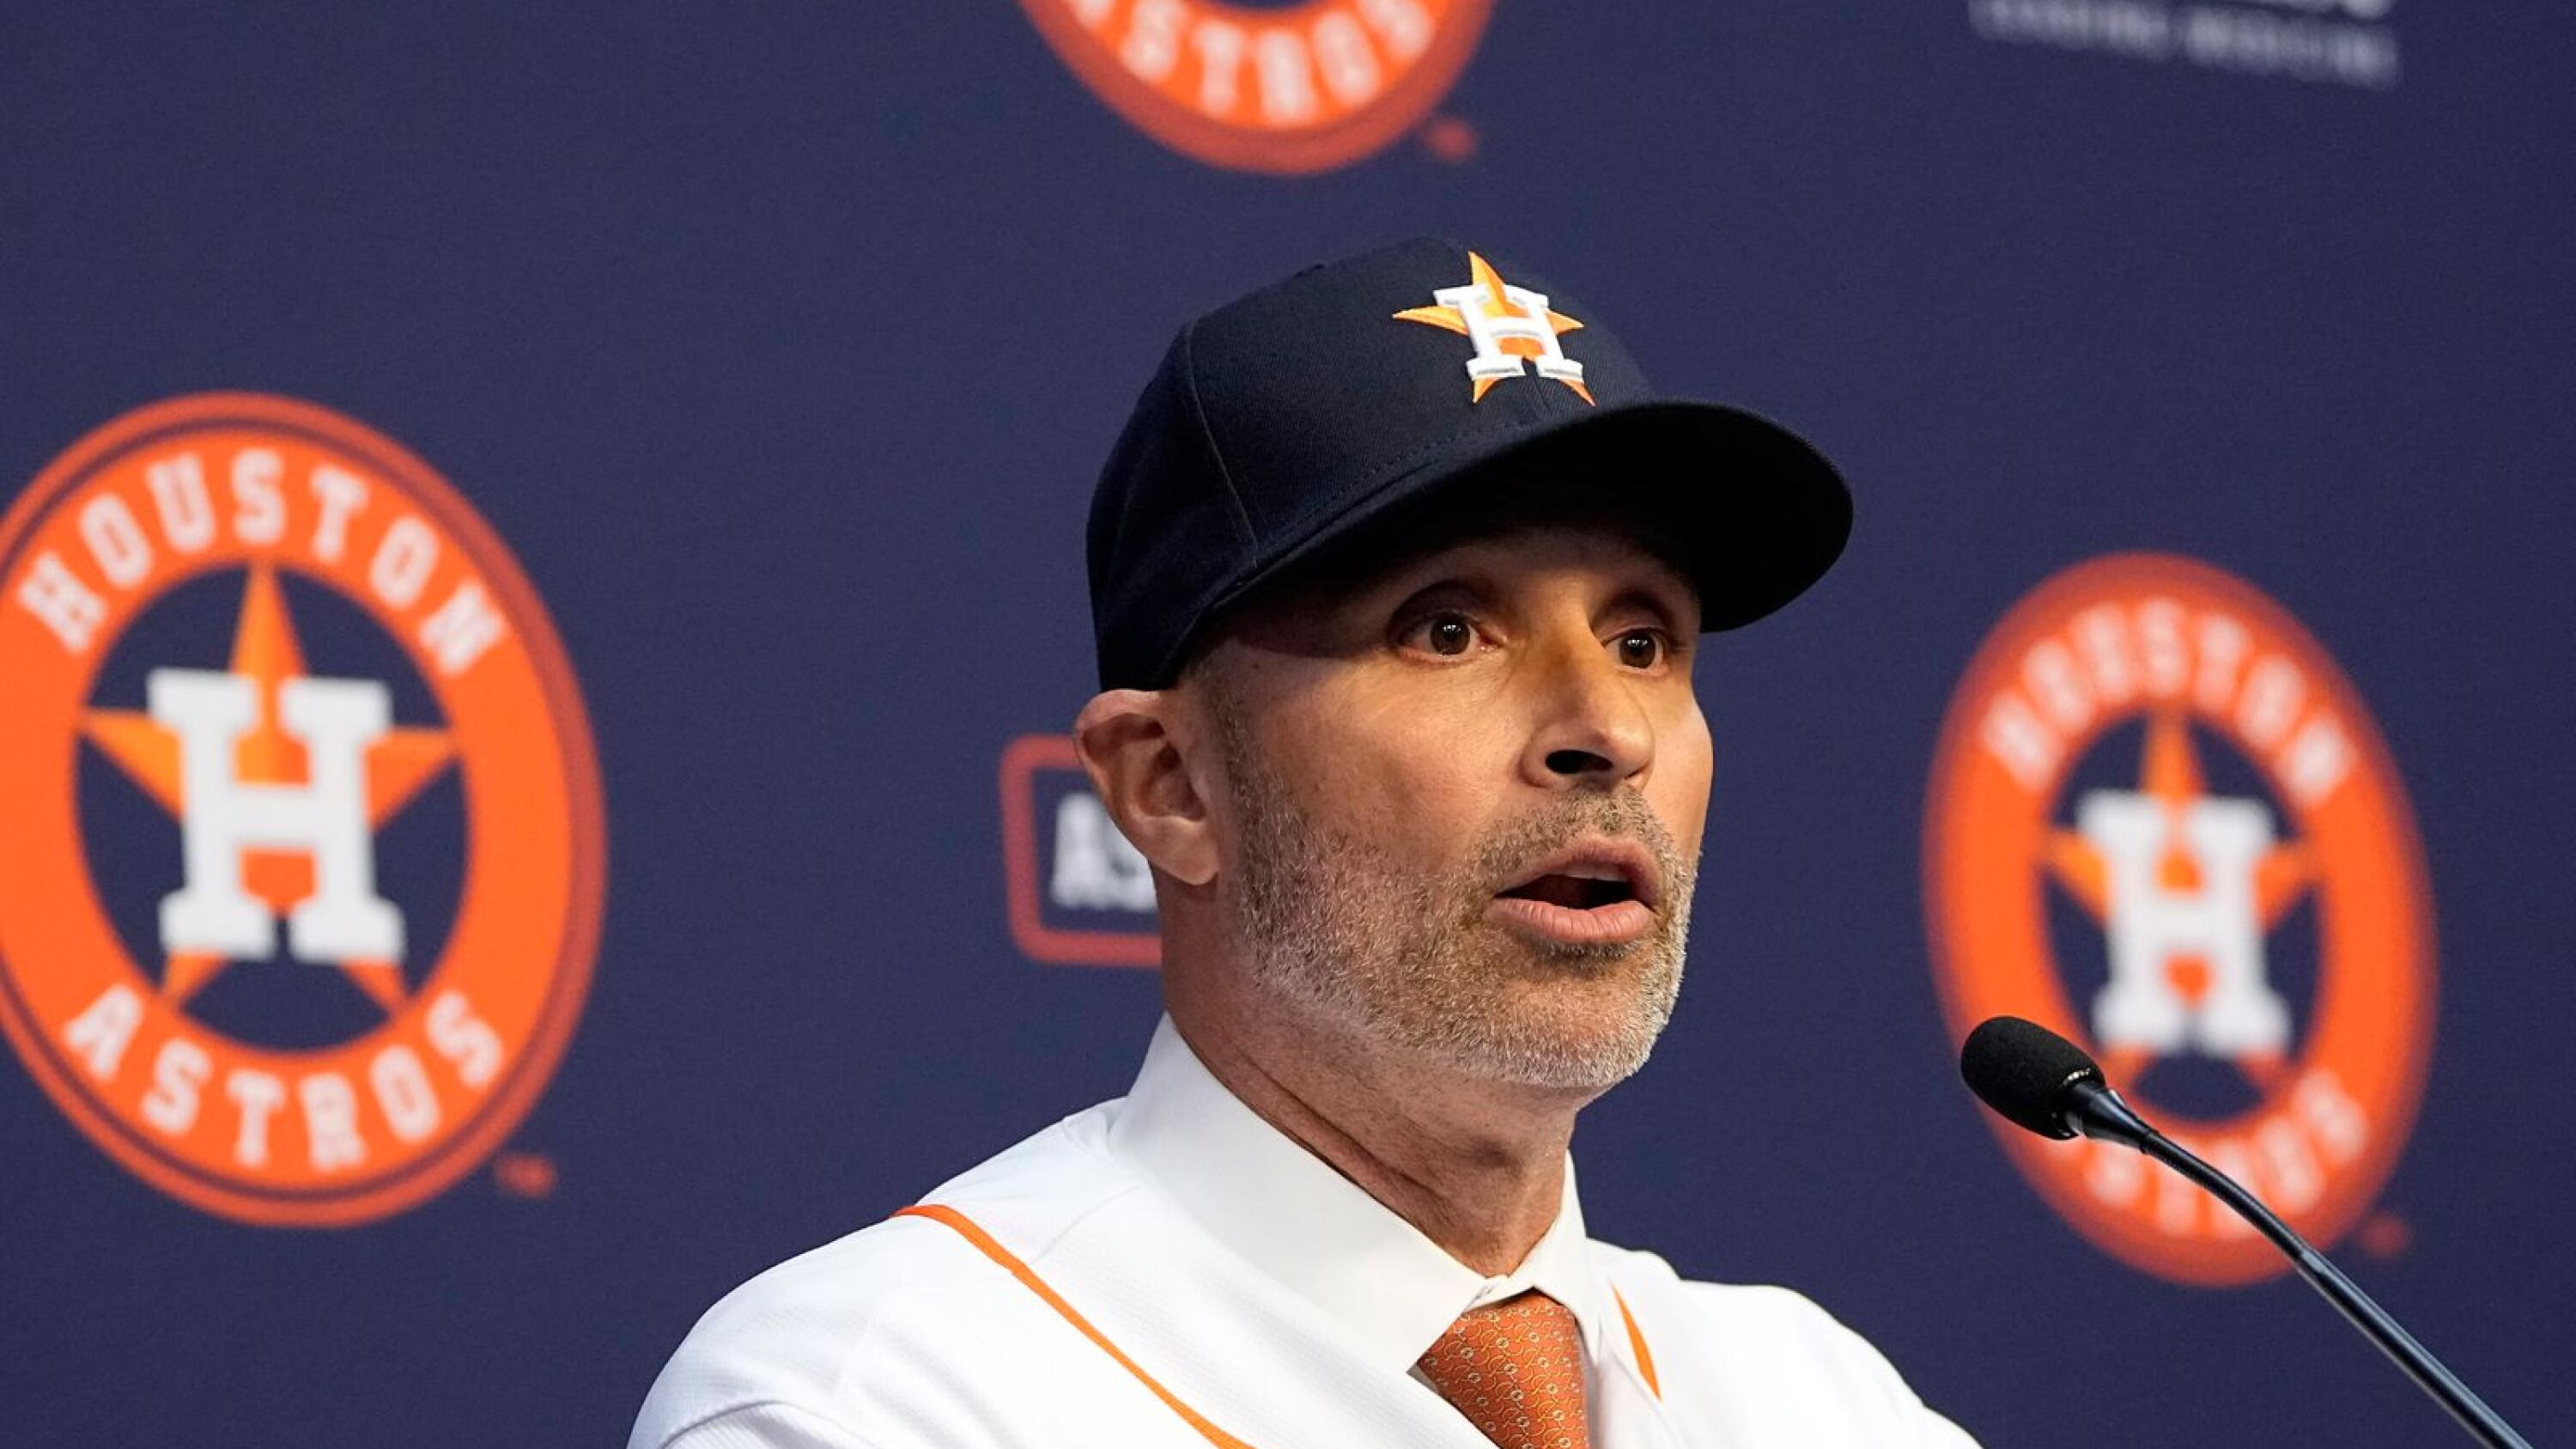 Joe Espada introduced as manager of Astros, replacing Dusty Baker, who retired last month